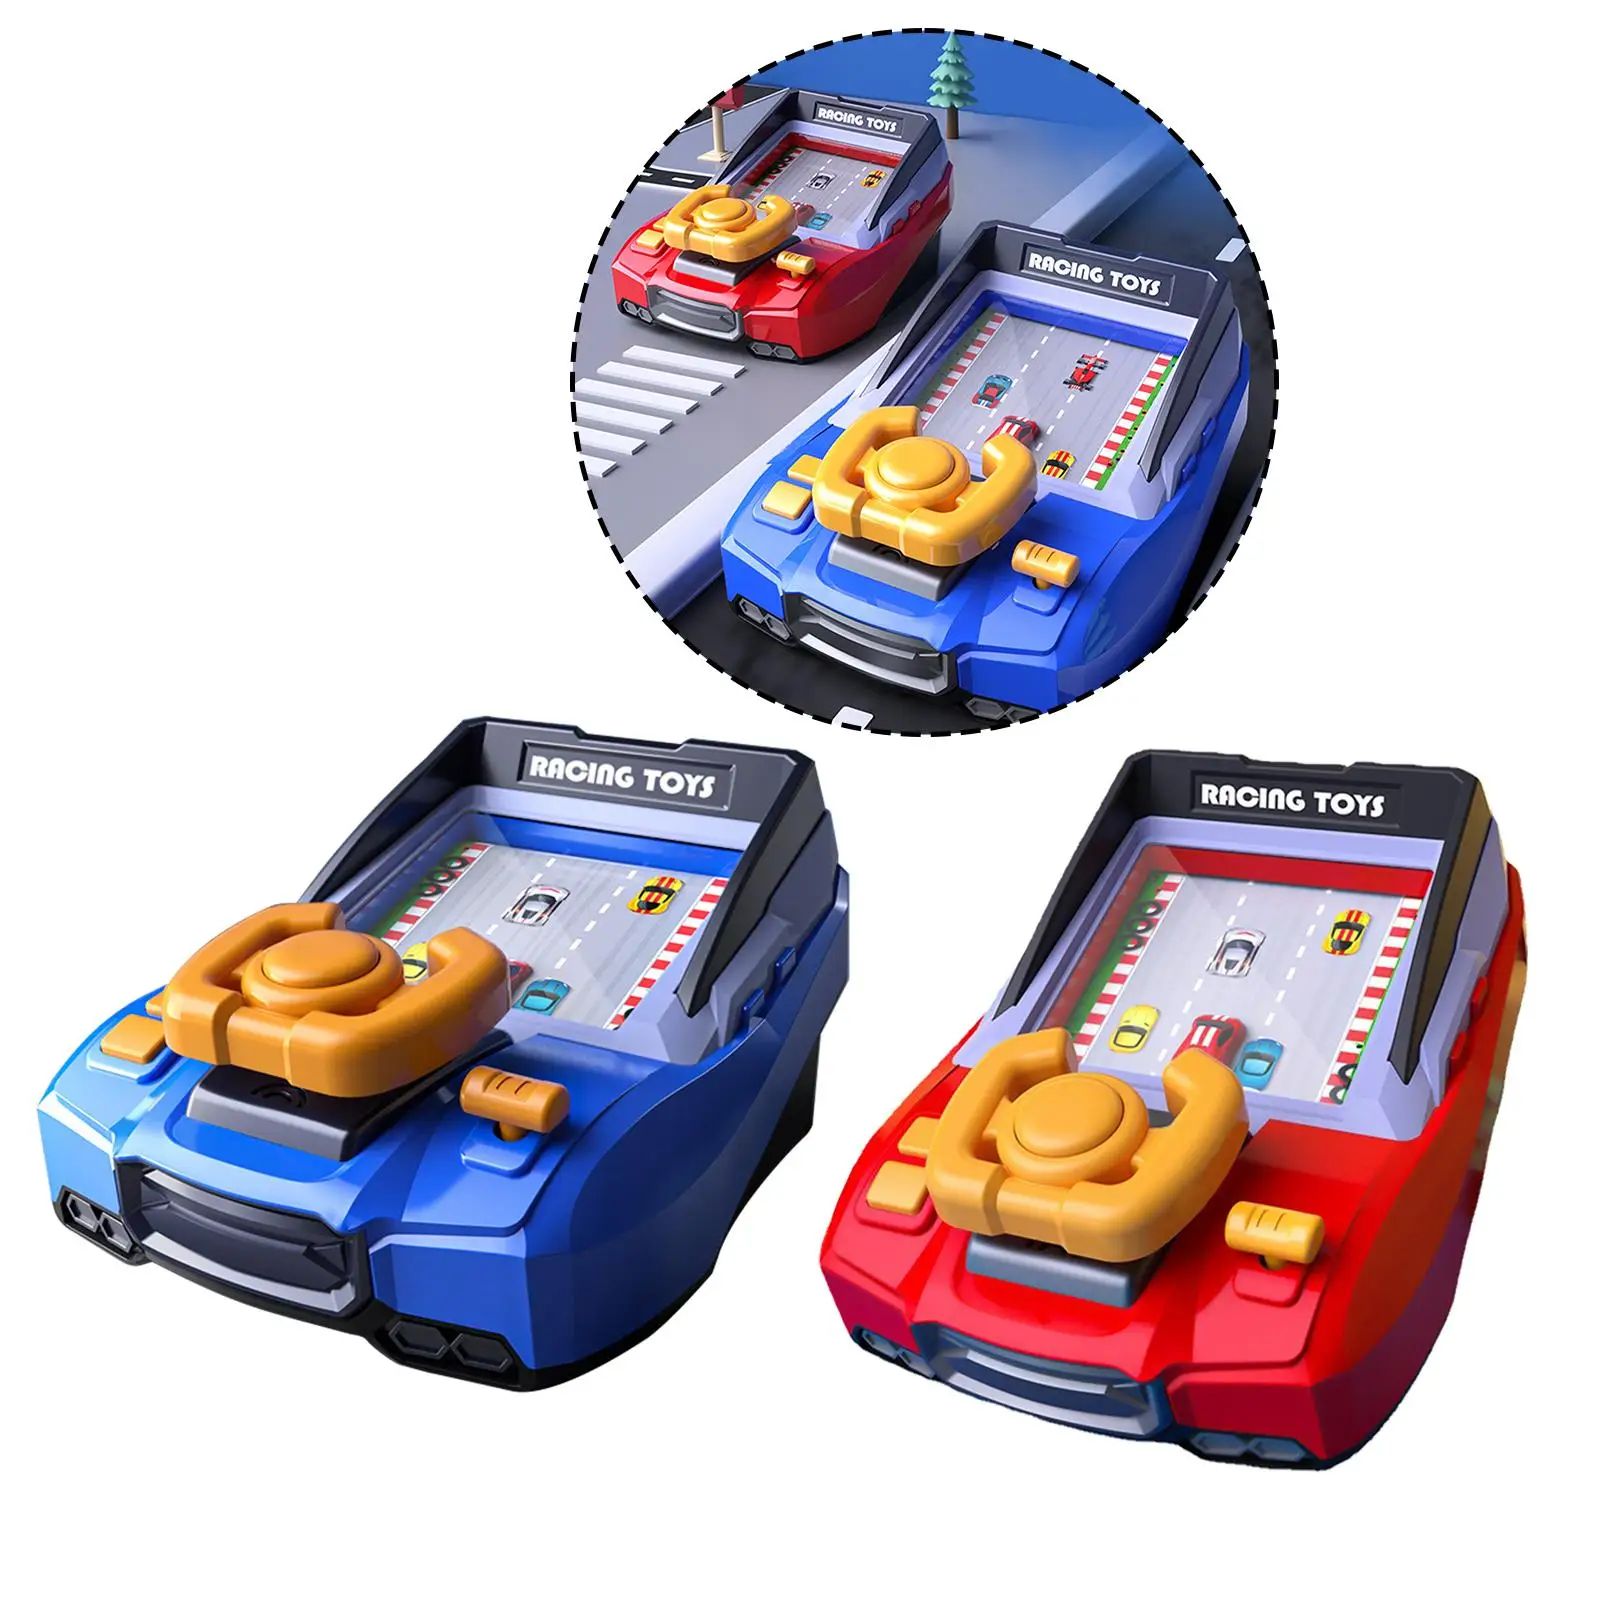 Hands On Puzzle Simulation game car plaything for Garden Vehicle Indoor